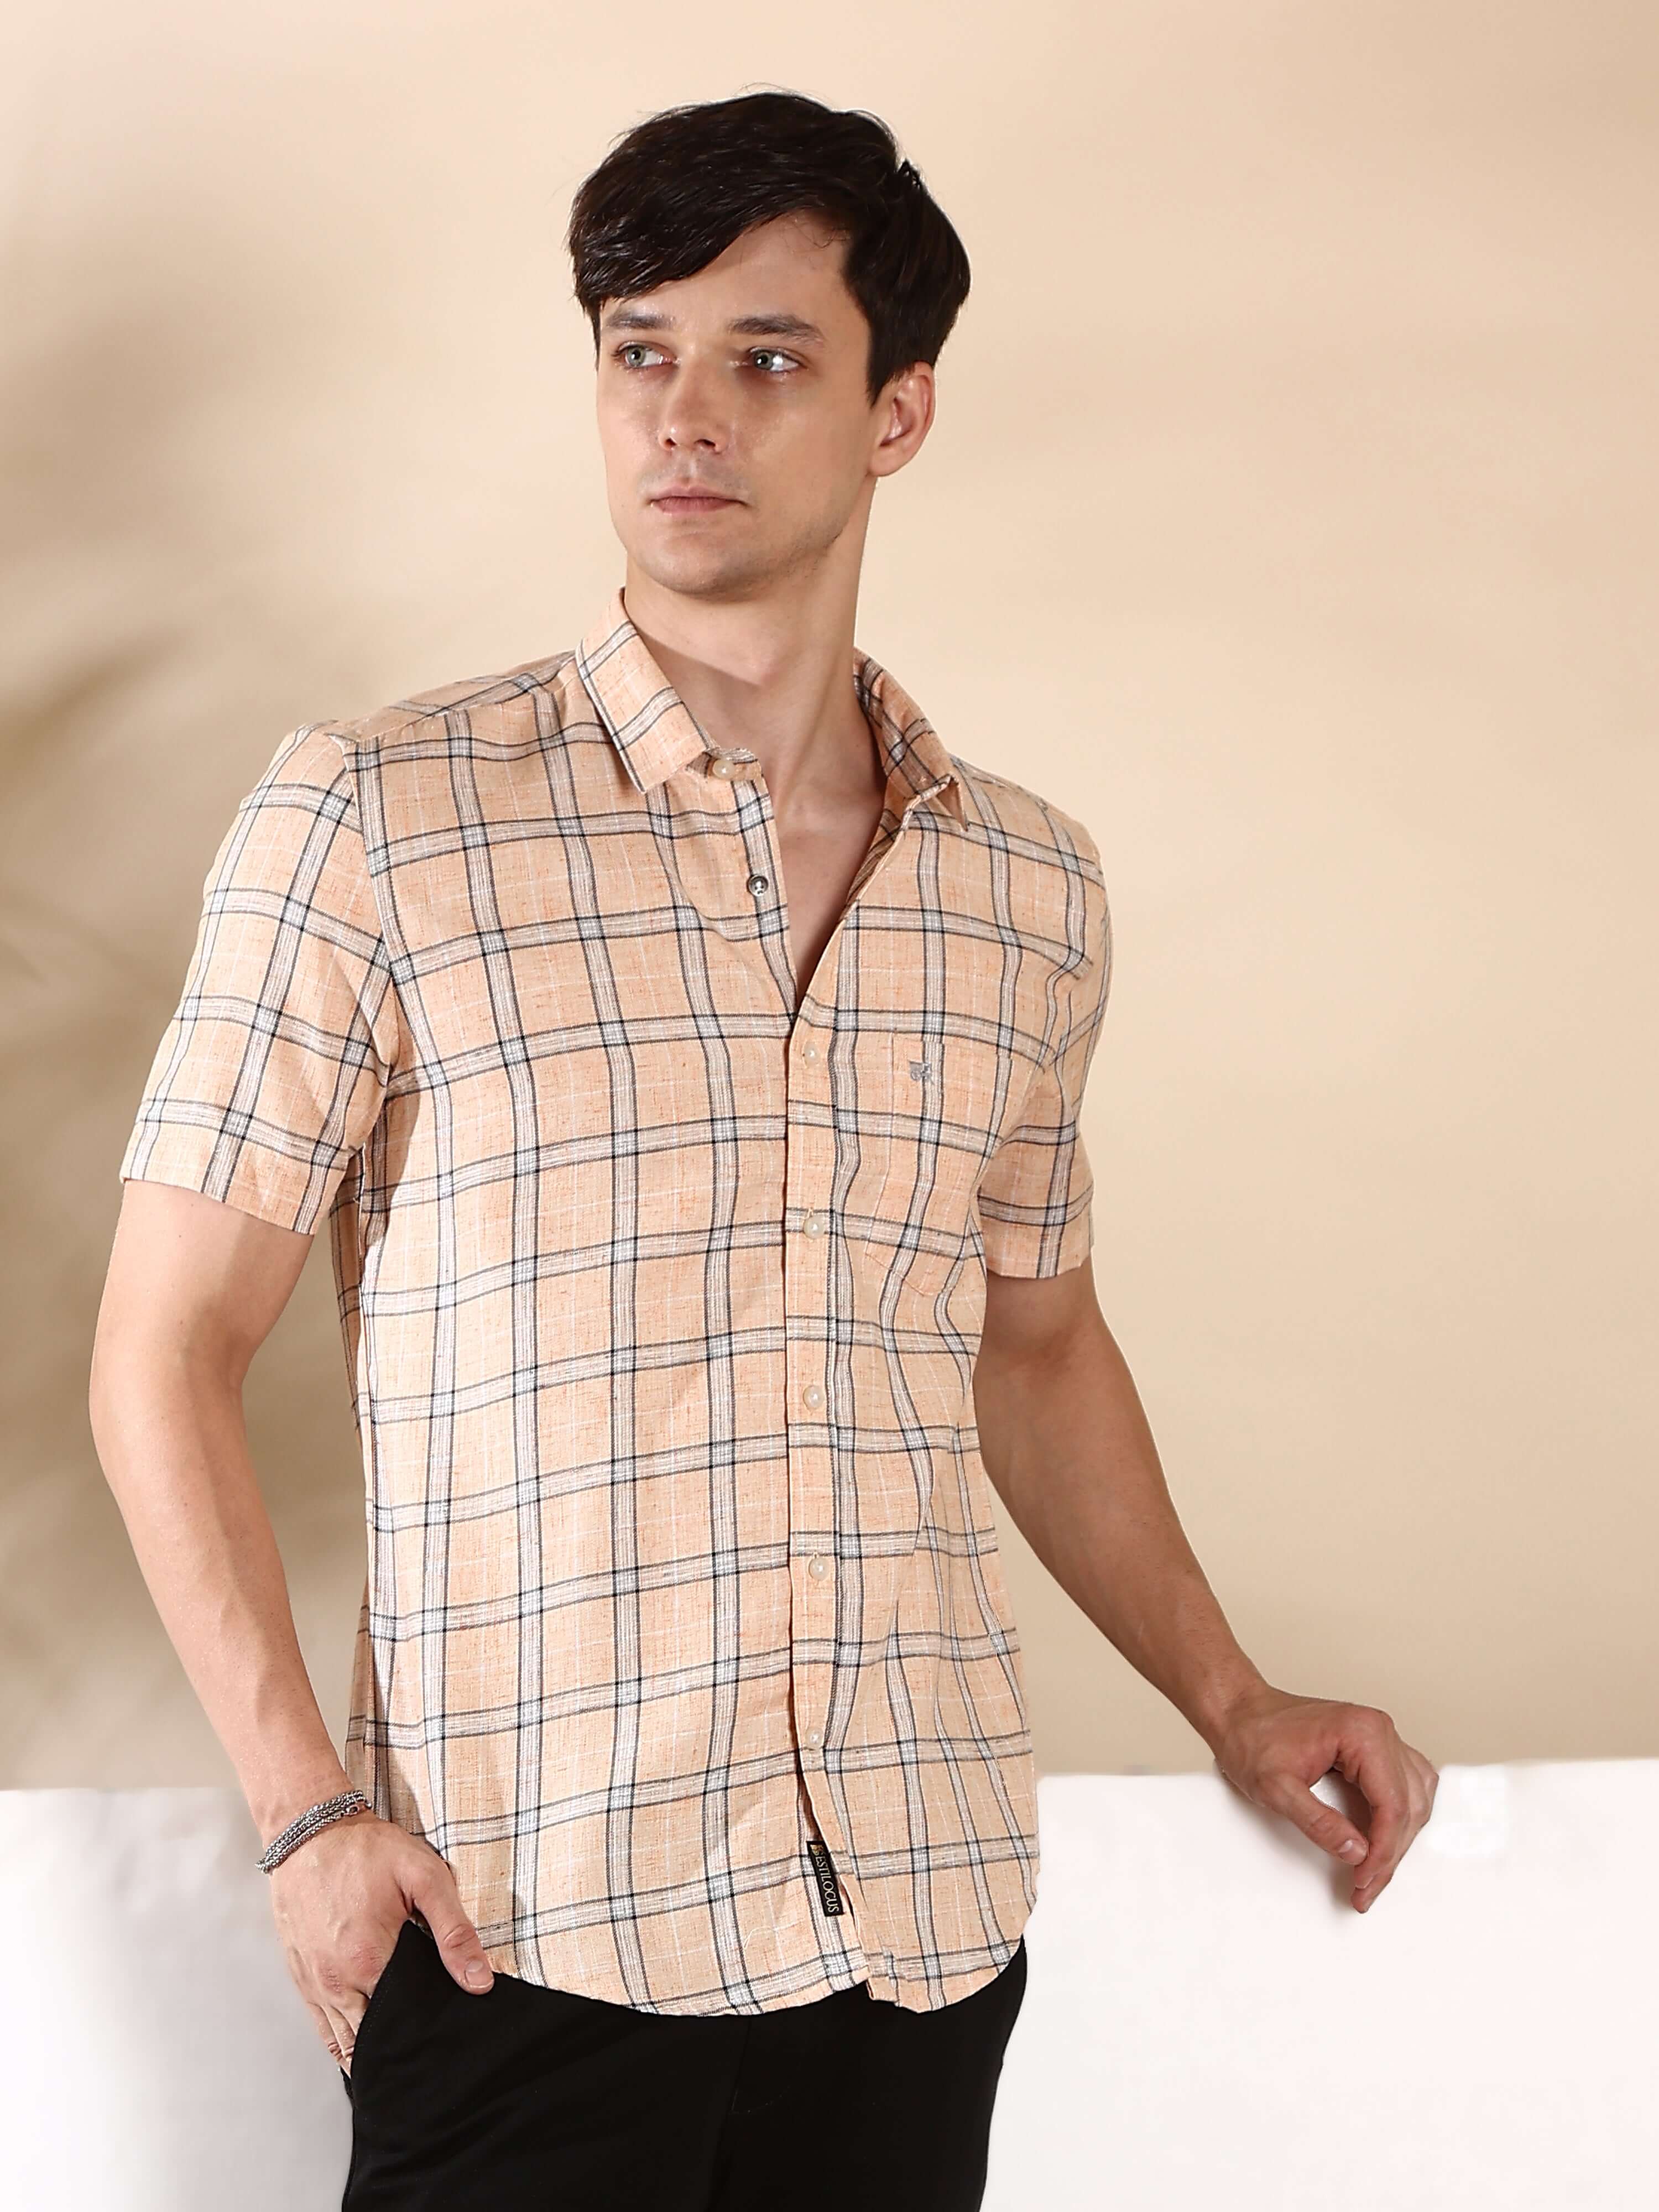 Orange casual check half sleeves shirt shop online at Estilocus. • Half-sleeve check shirt• Cut and sew placket• Regular collar• Single pocket with logo embroidery• Curved hemline• Finest quality sewing• Machine wash care• Suitable to wear with all types